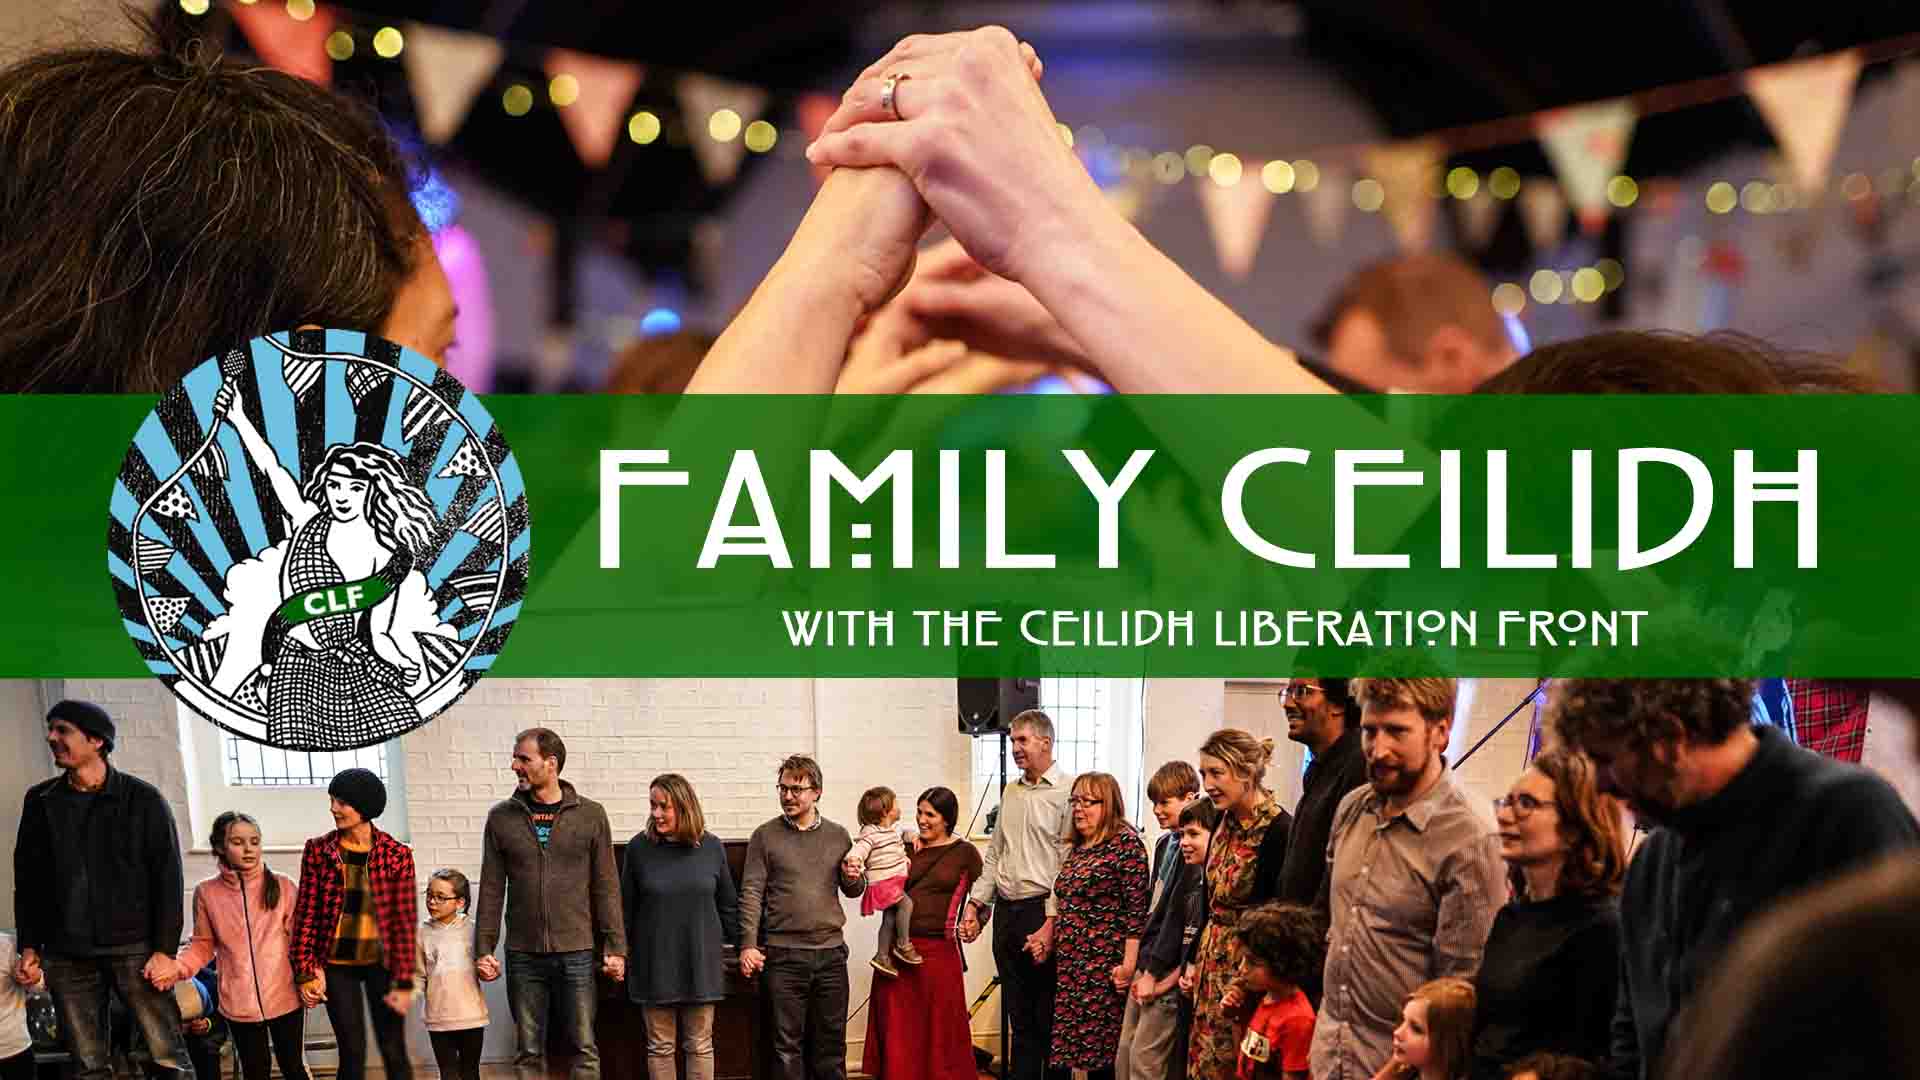 Ceilidh Dance Events in London